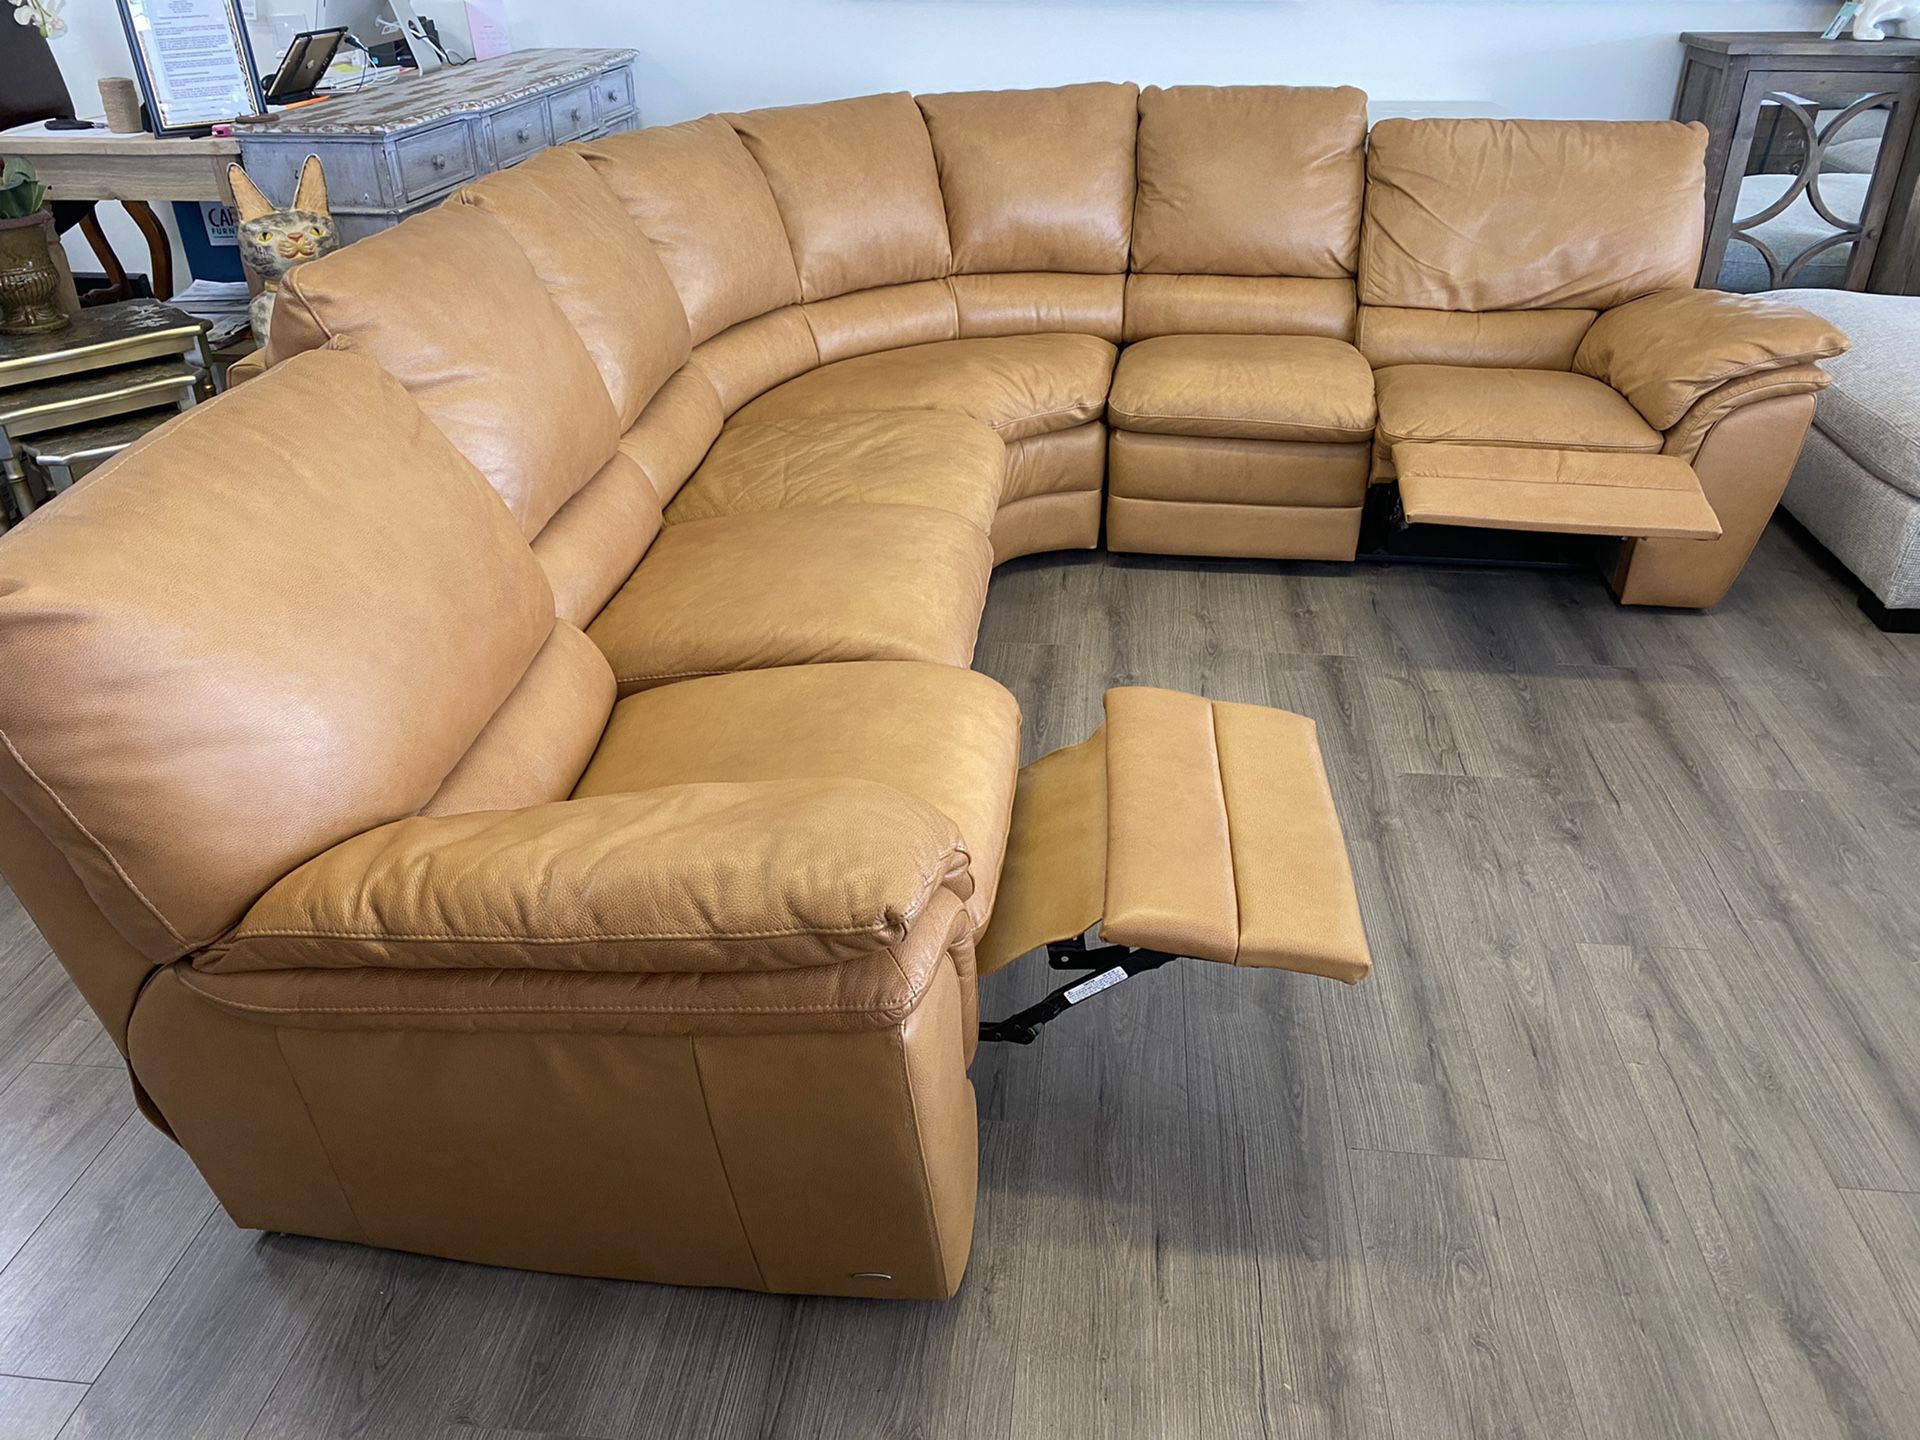 120x100 Double Reclining Natuzzi Real Leather Sectional Couch Sofa Camel Color Excellent Mint